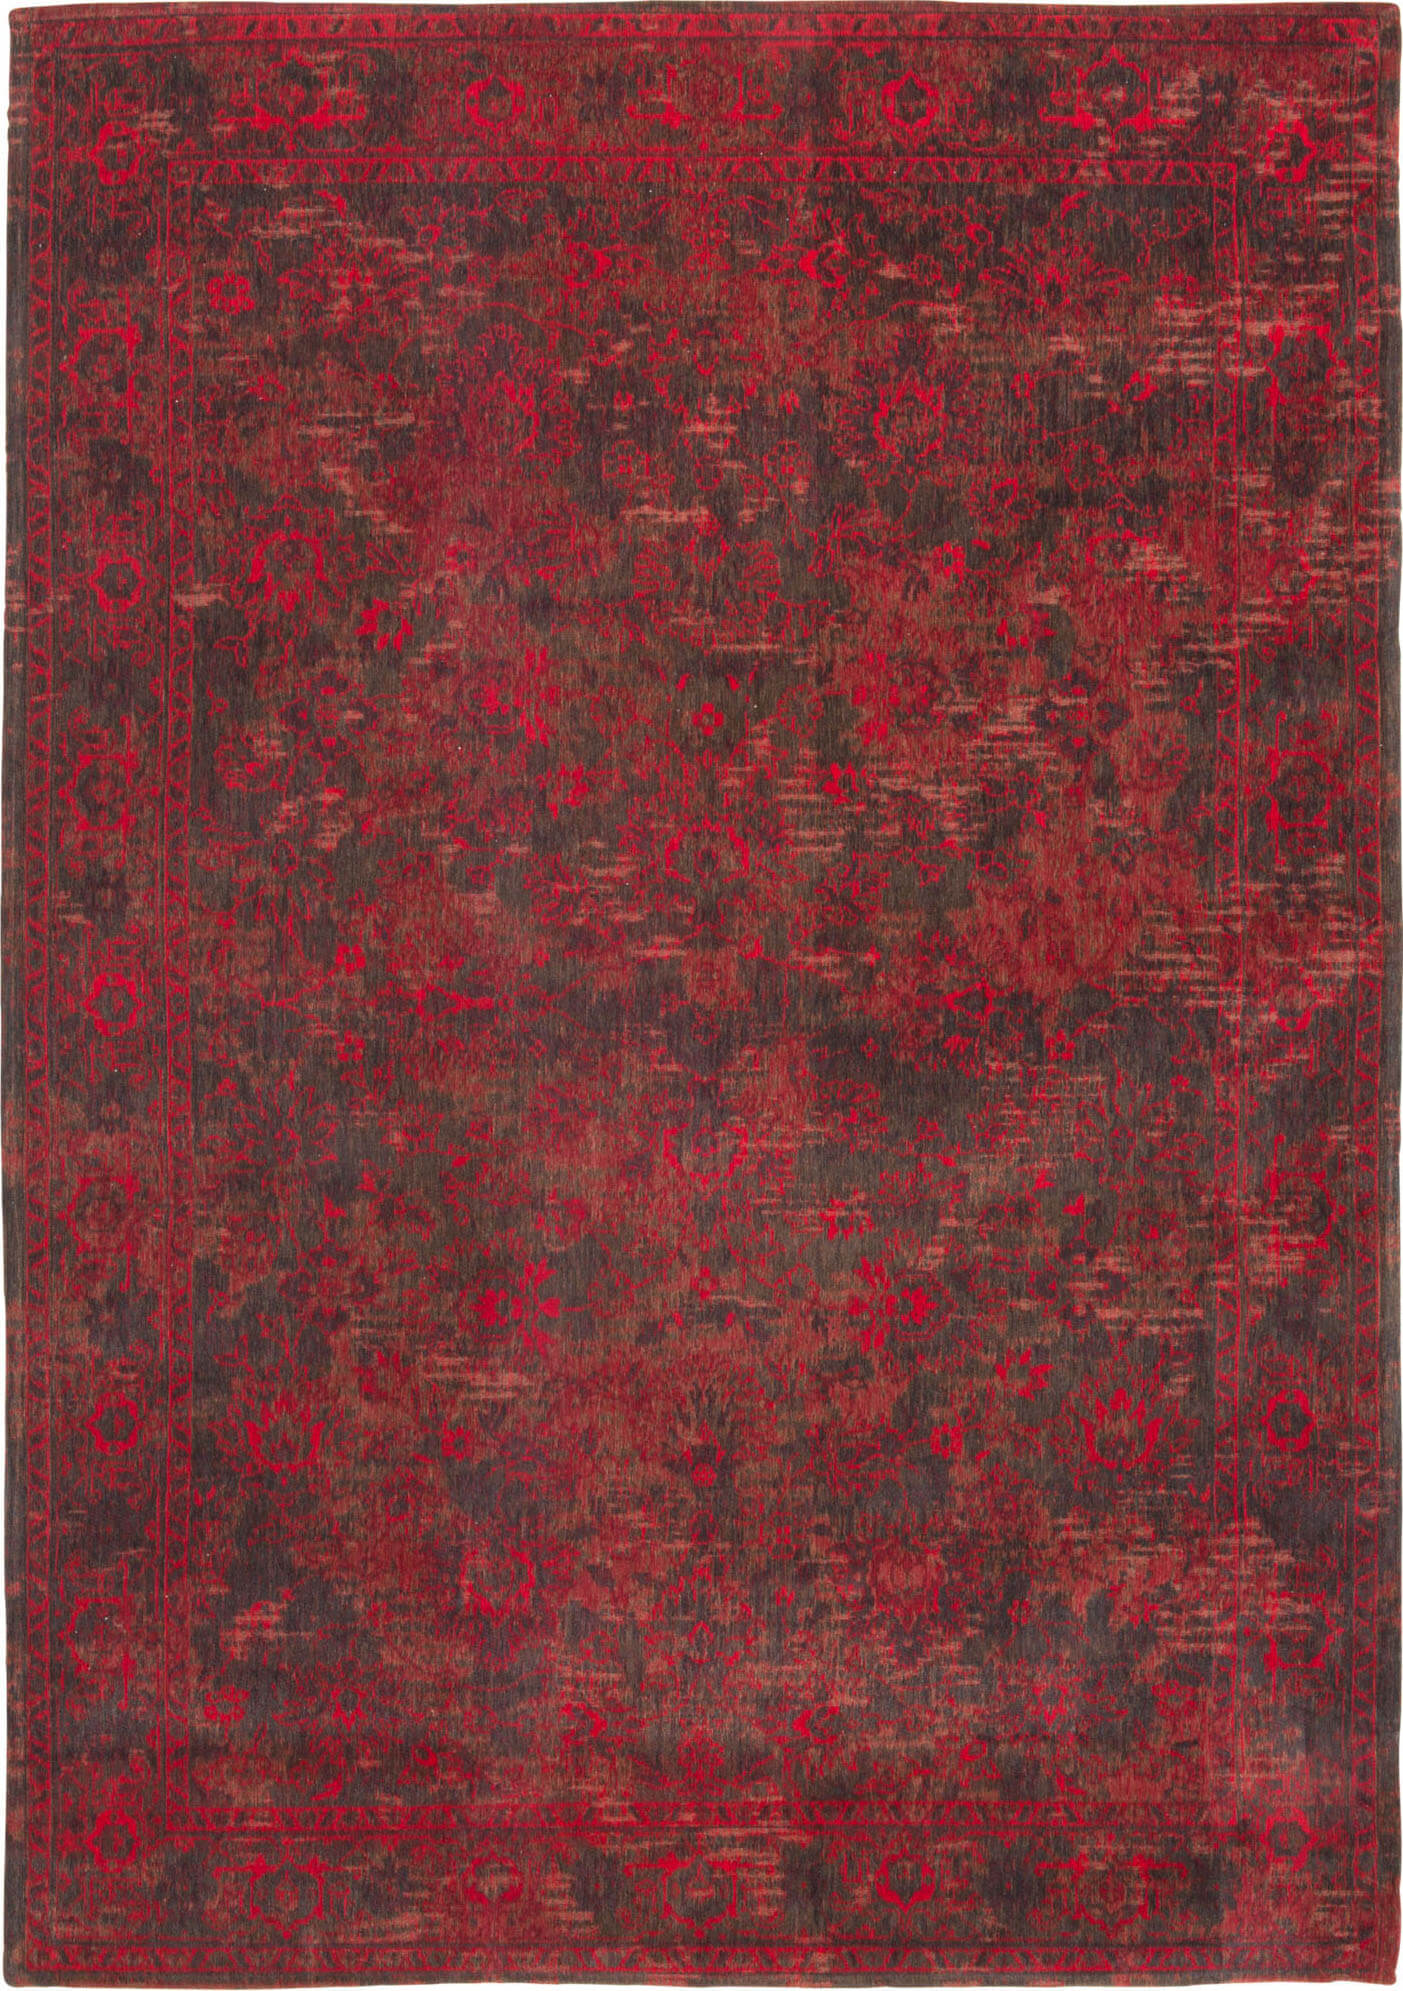 Grey Red Bright Persian Vintage Rug ☞ Size: 140 x 200 cm